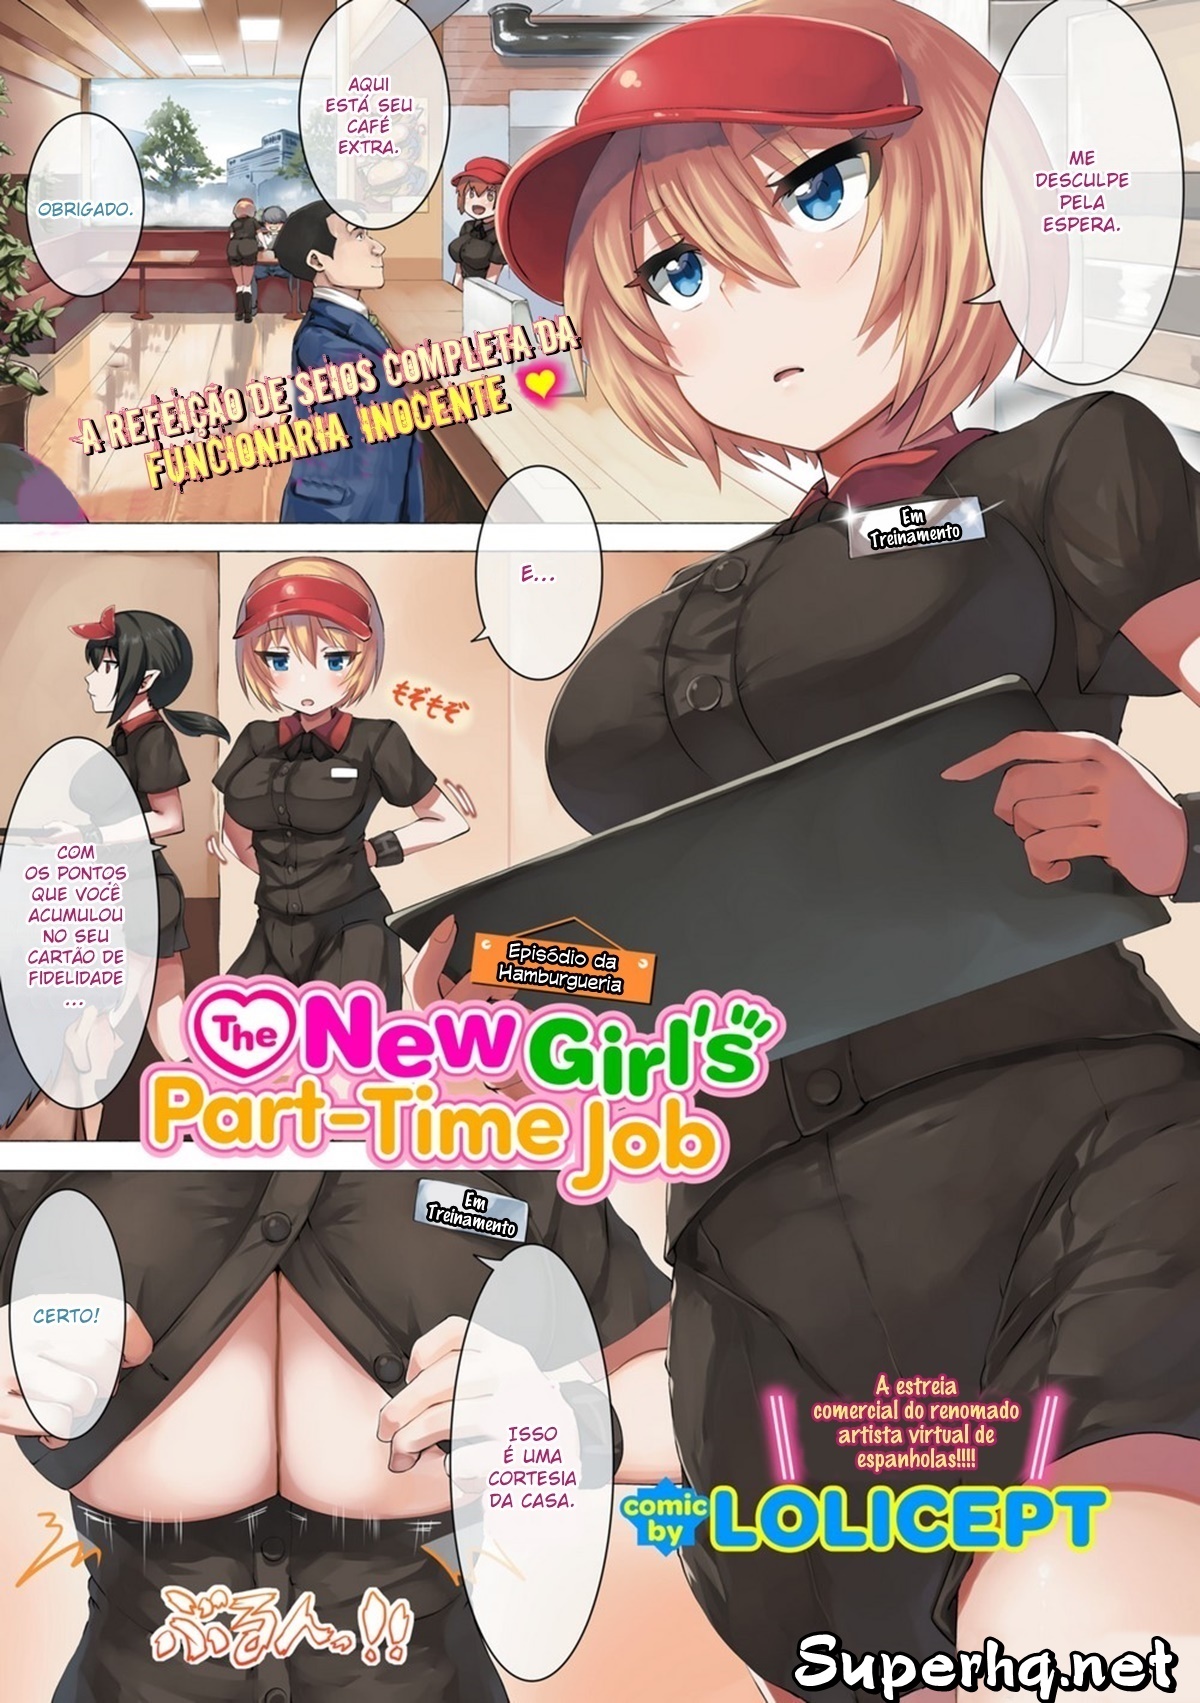 The New Girl's Part-Time Job